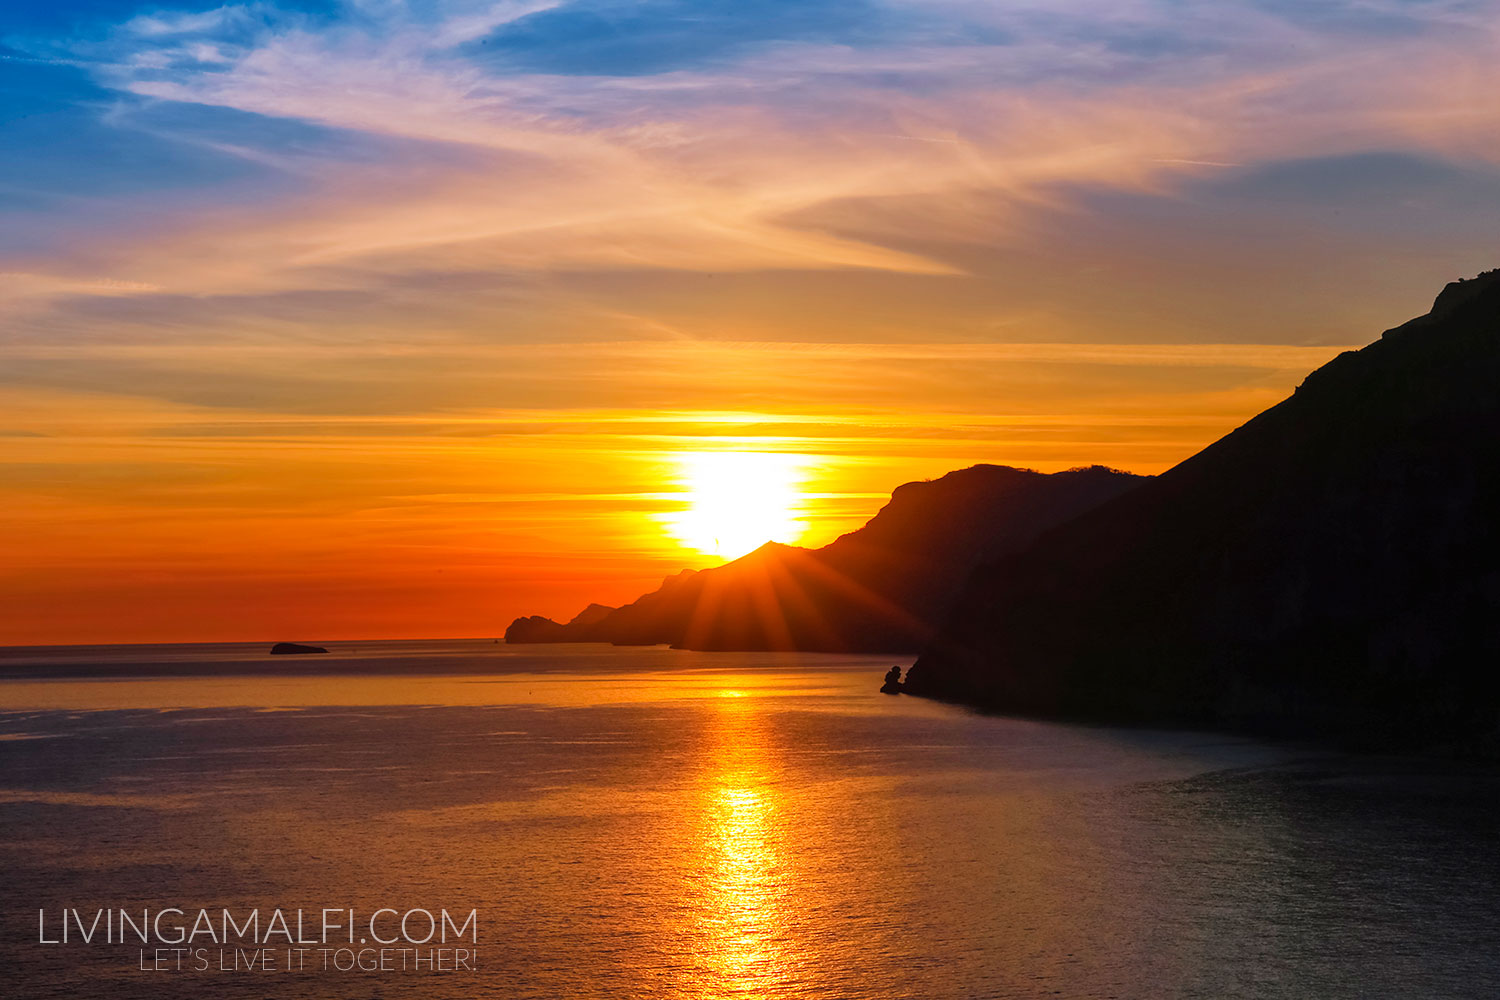 The most spectacular winter sunsets on the Amalfi Coast